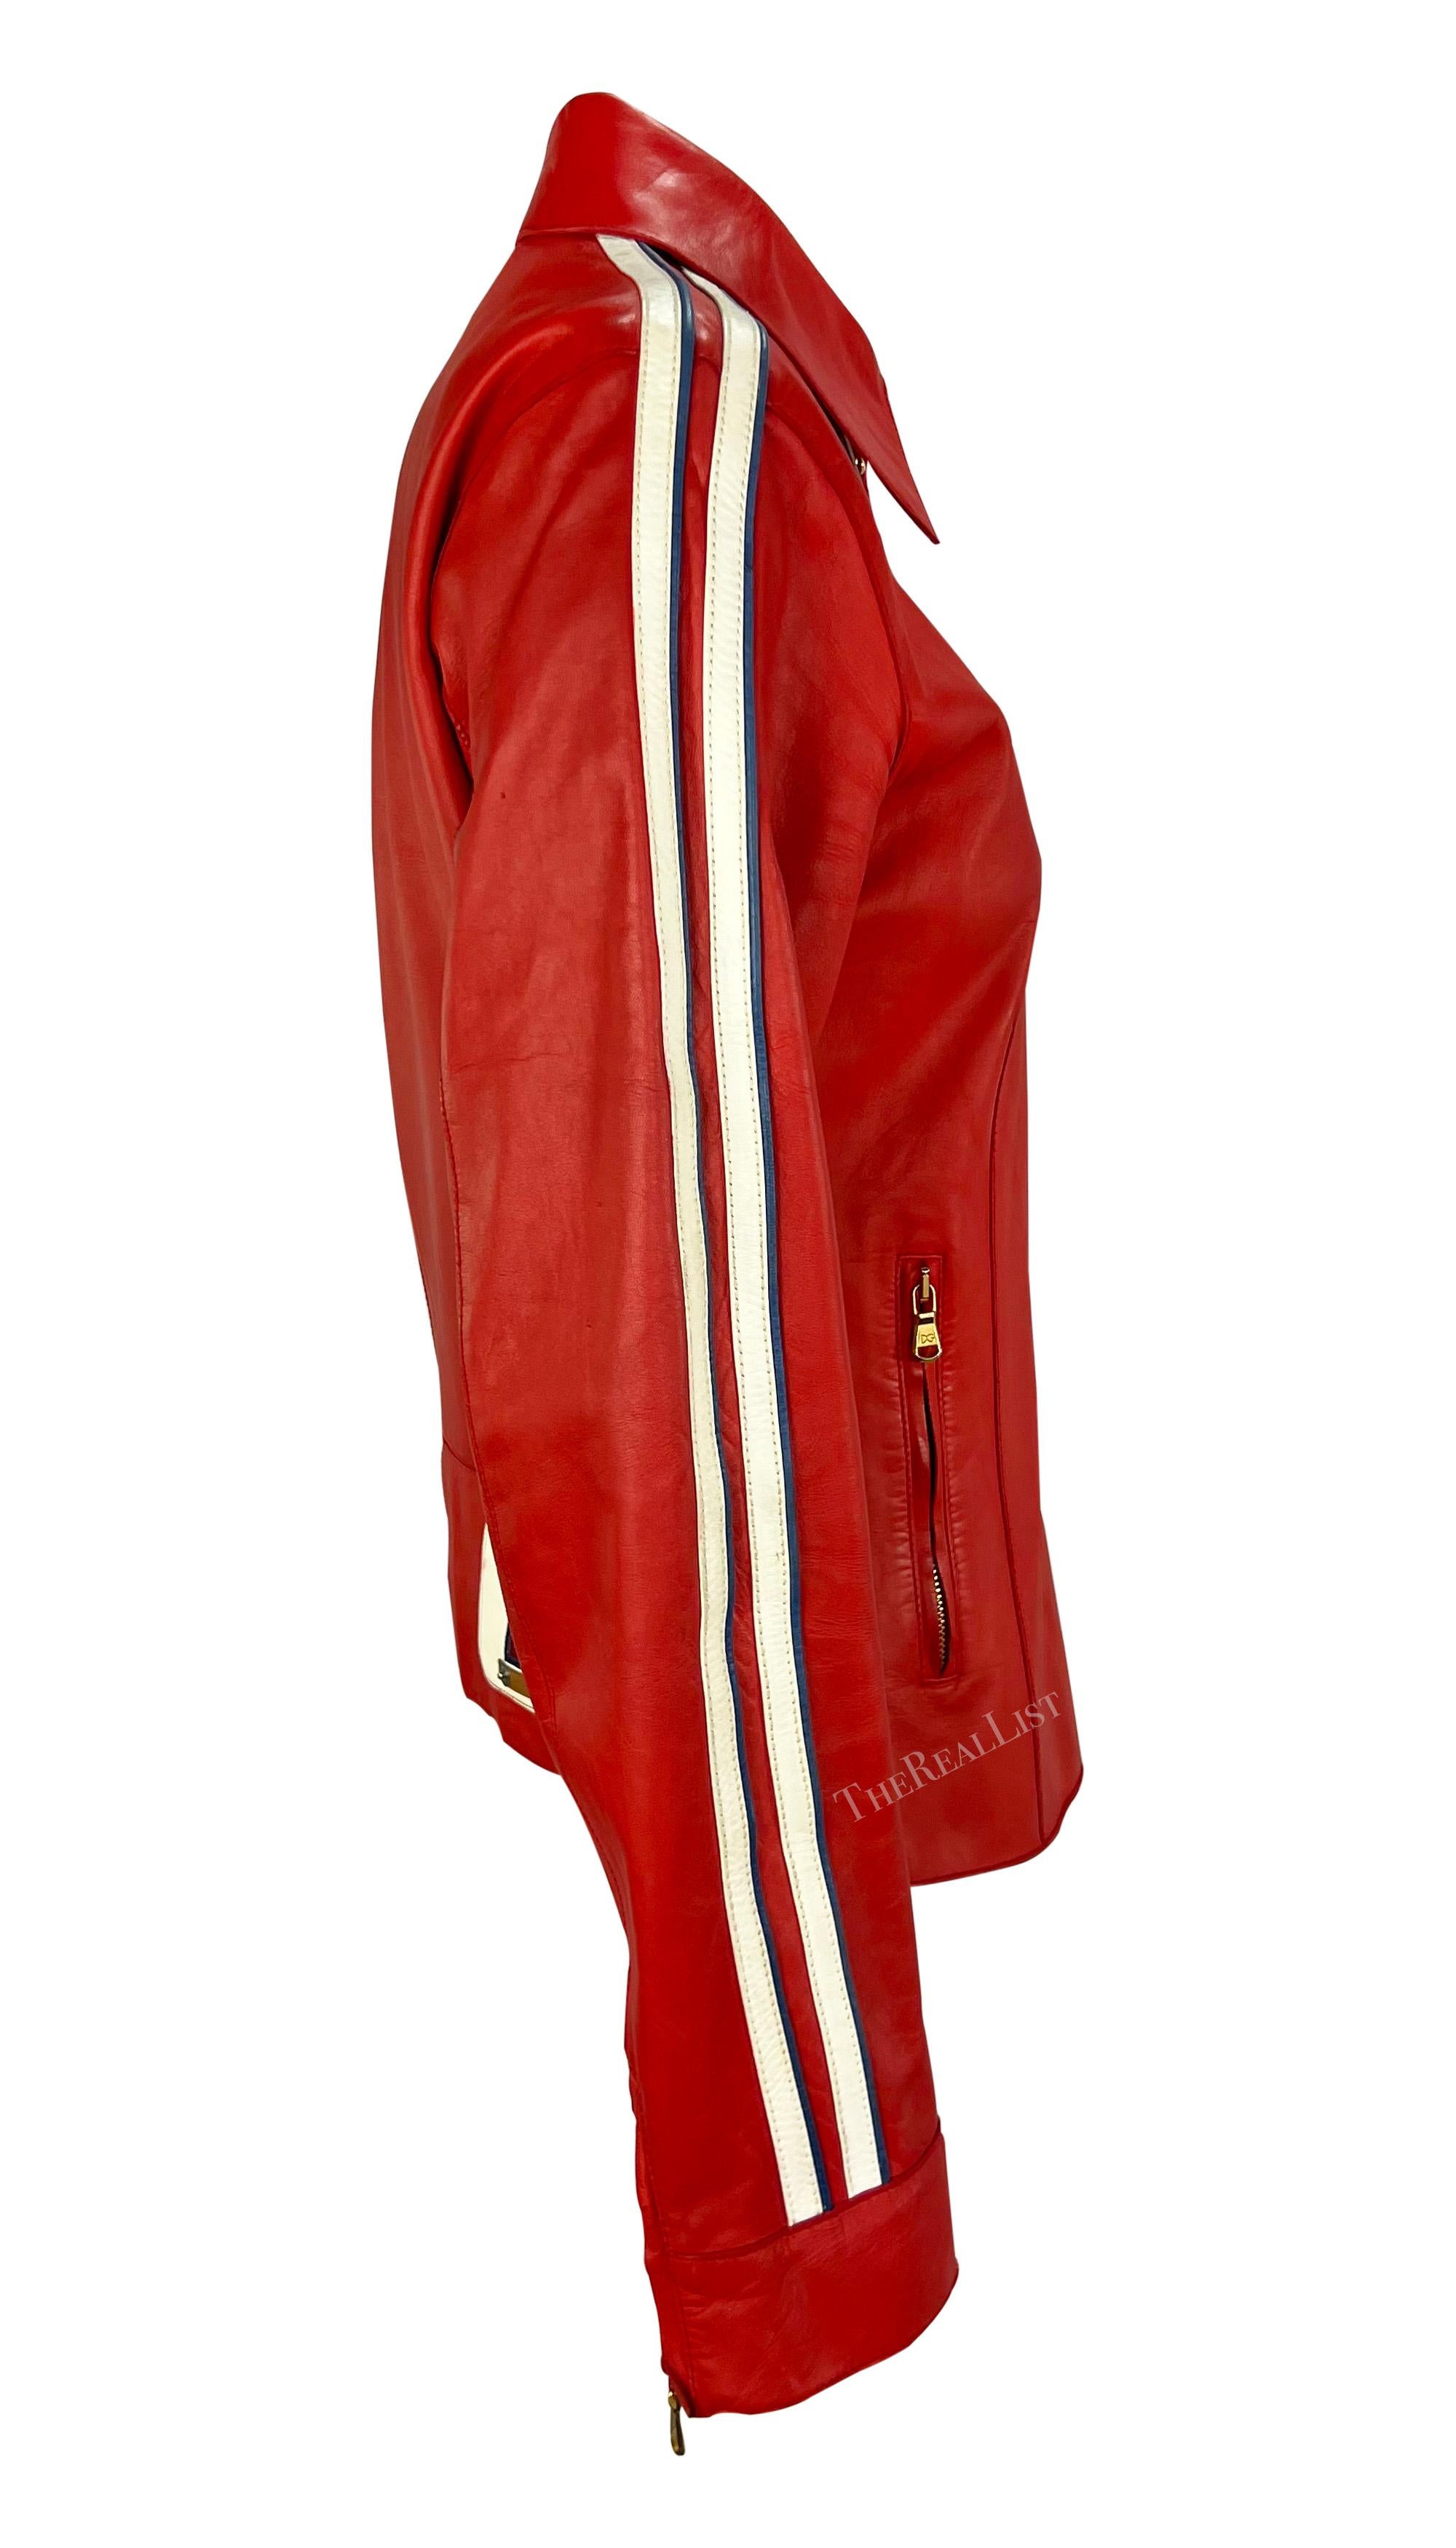 Presenting a chic red leather Dolce & Gabbana moto jacket. From the Spring/Summer 2001 collection, this jacket features a fold-over collar, white stripes that run along the arms, and a small ’21’ accent at the back. The jacket is made complete with